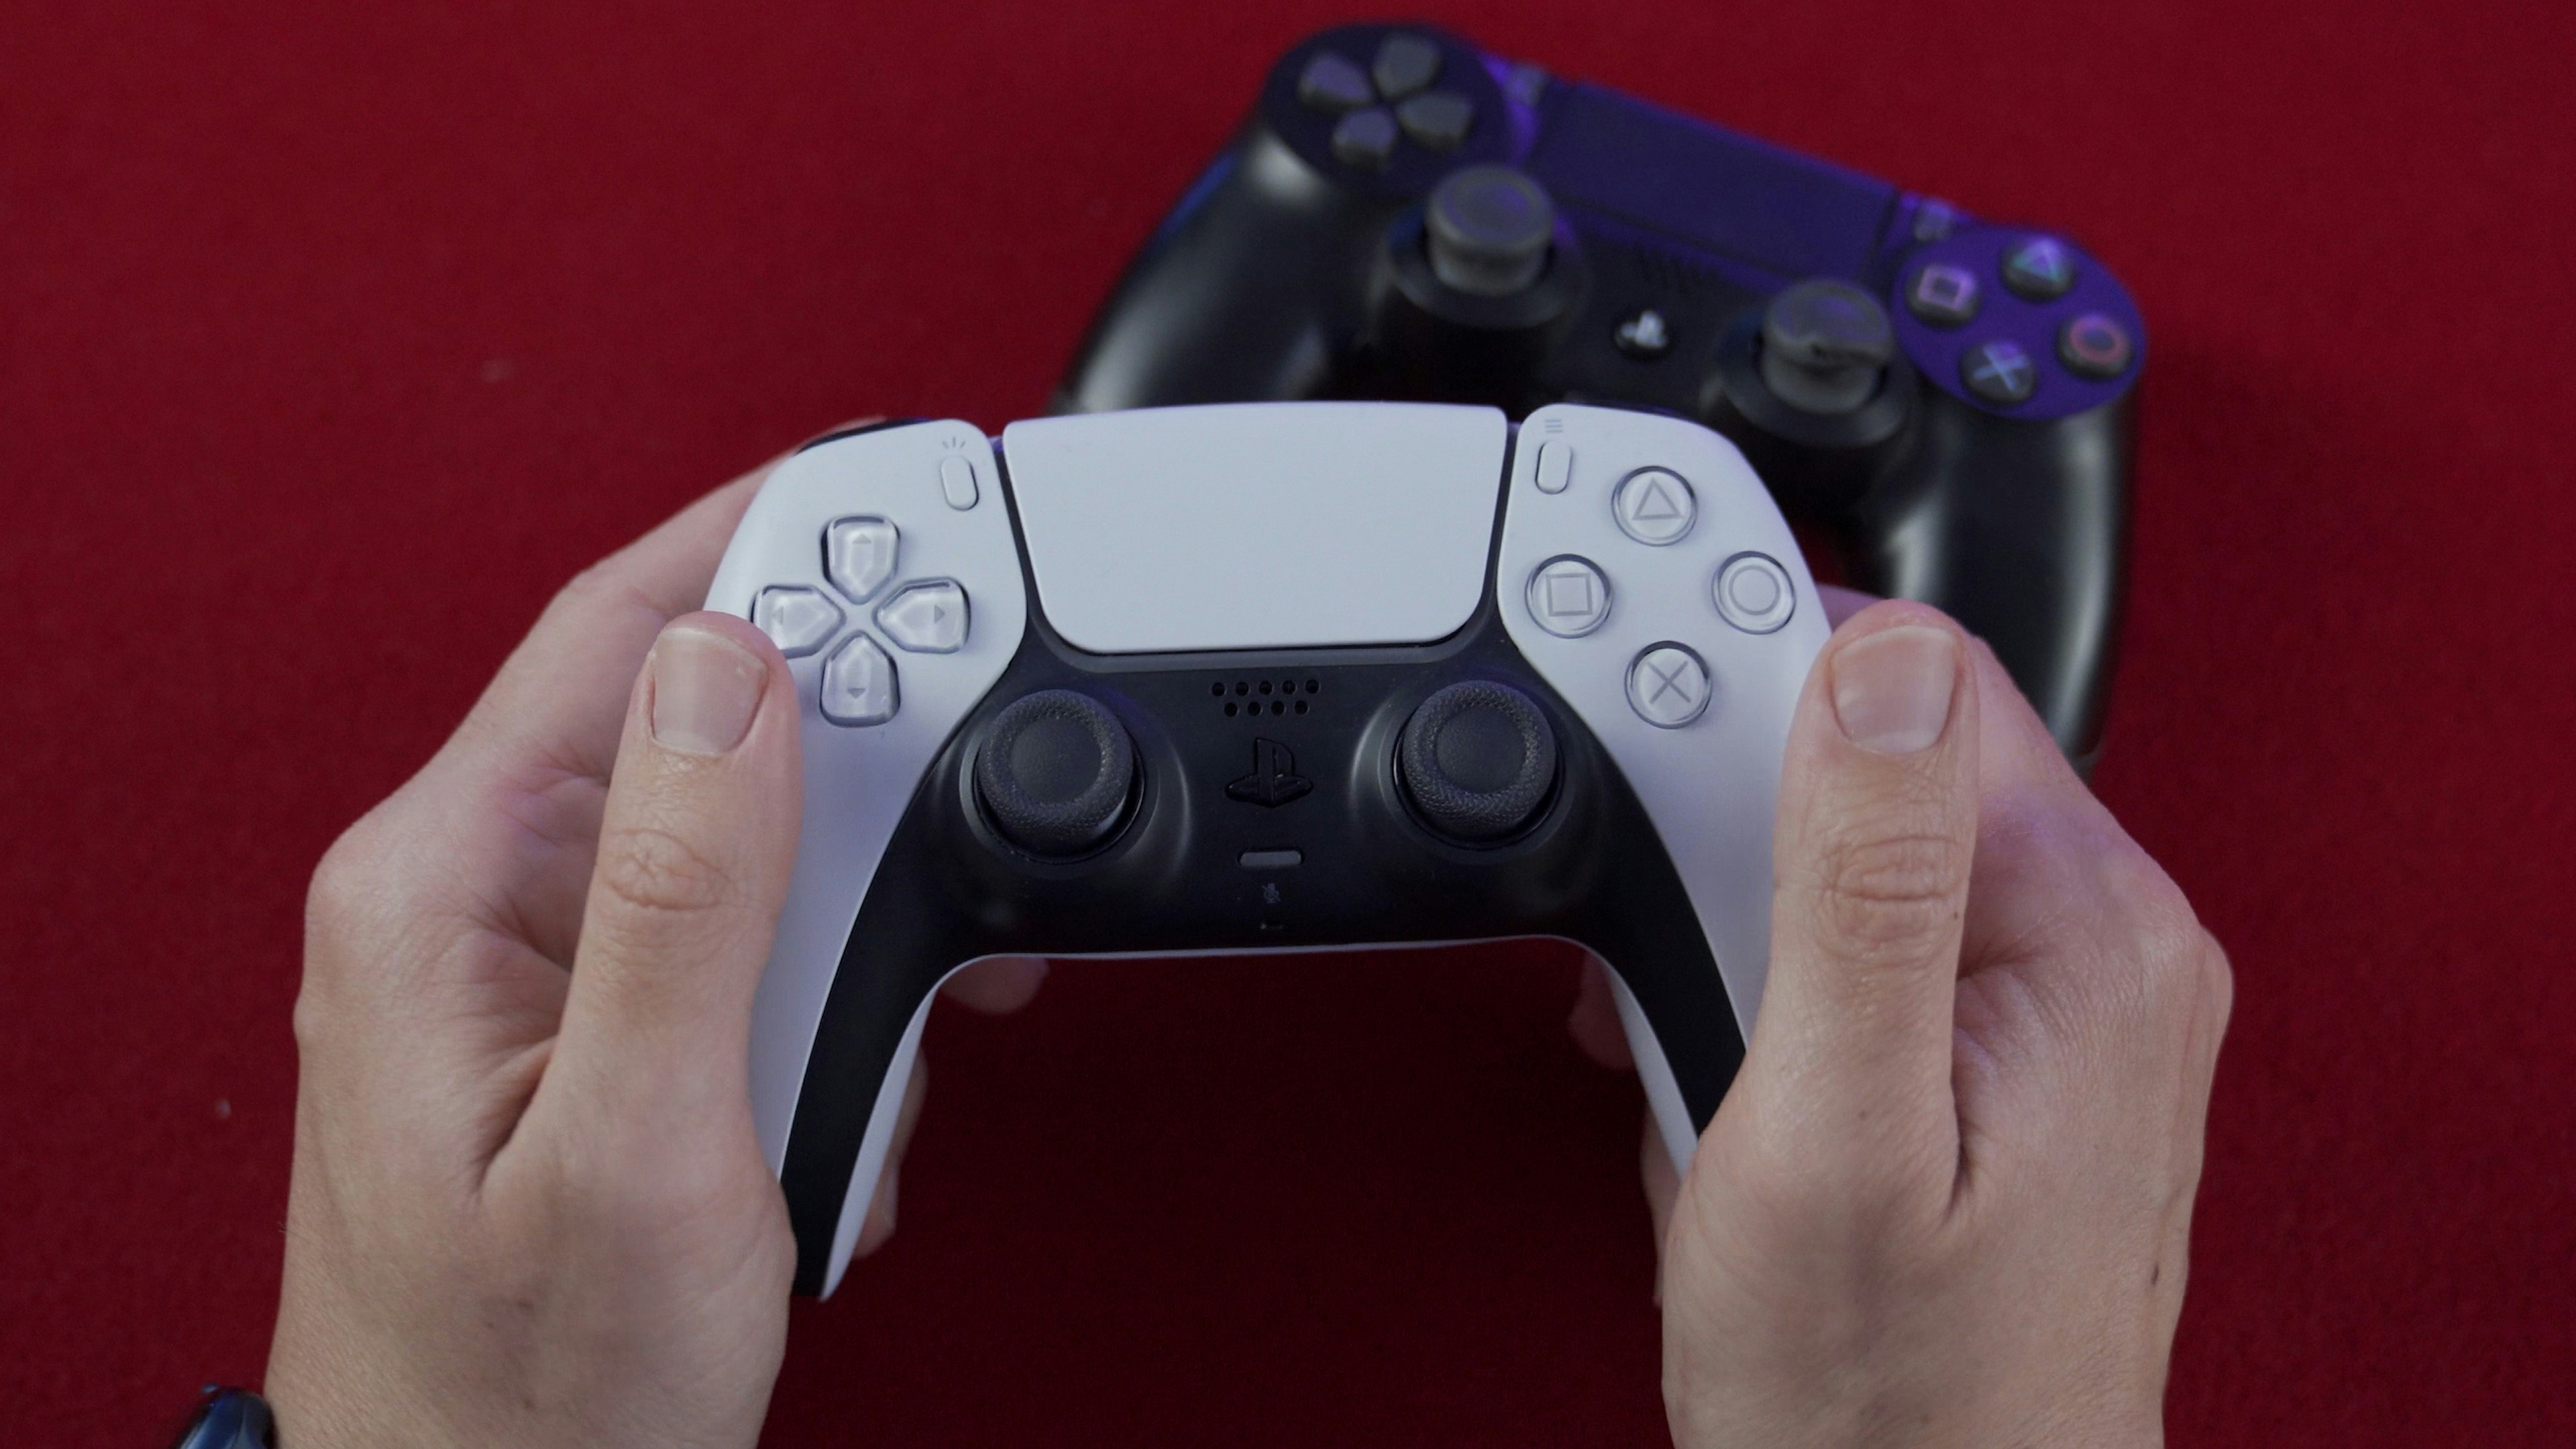 person holding white PS5 game controller